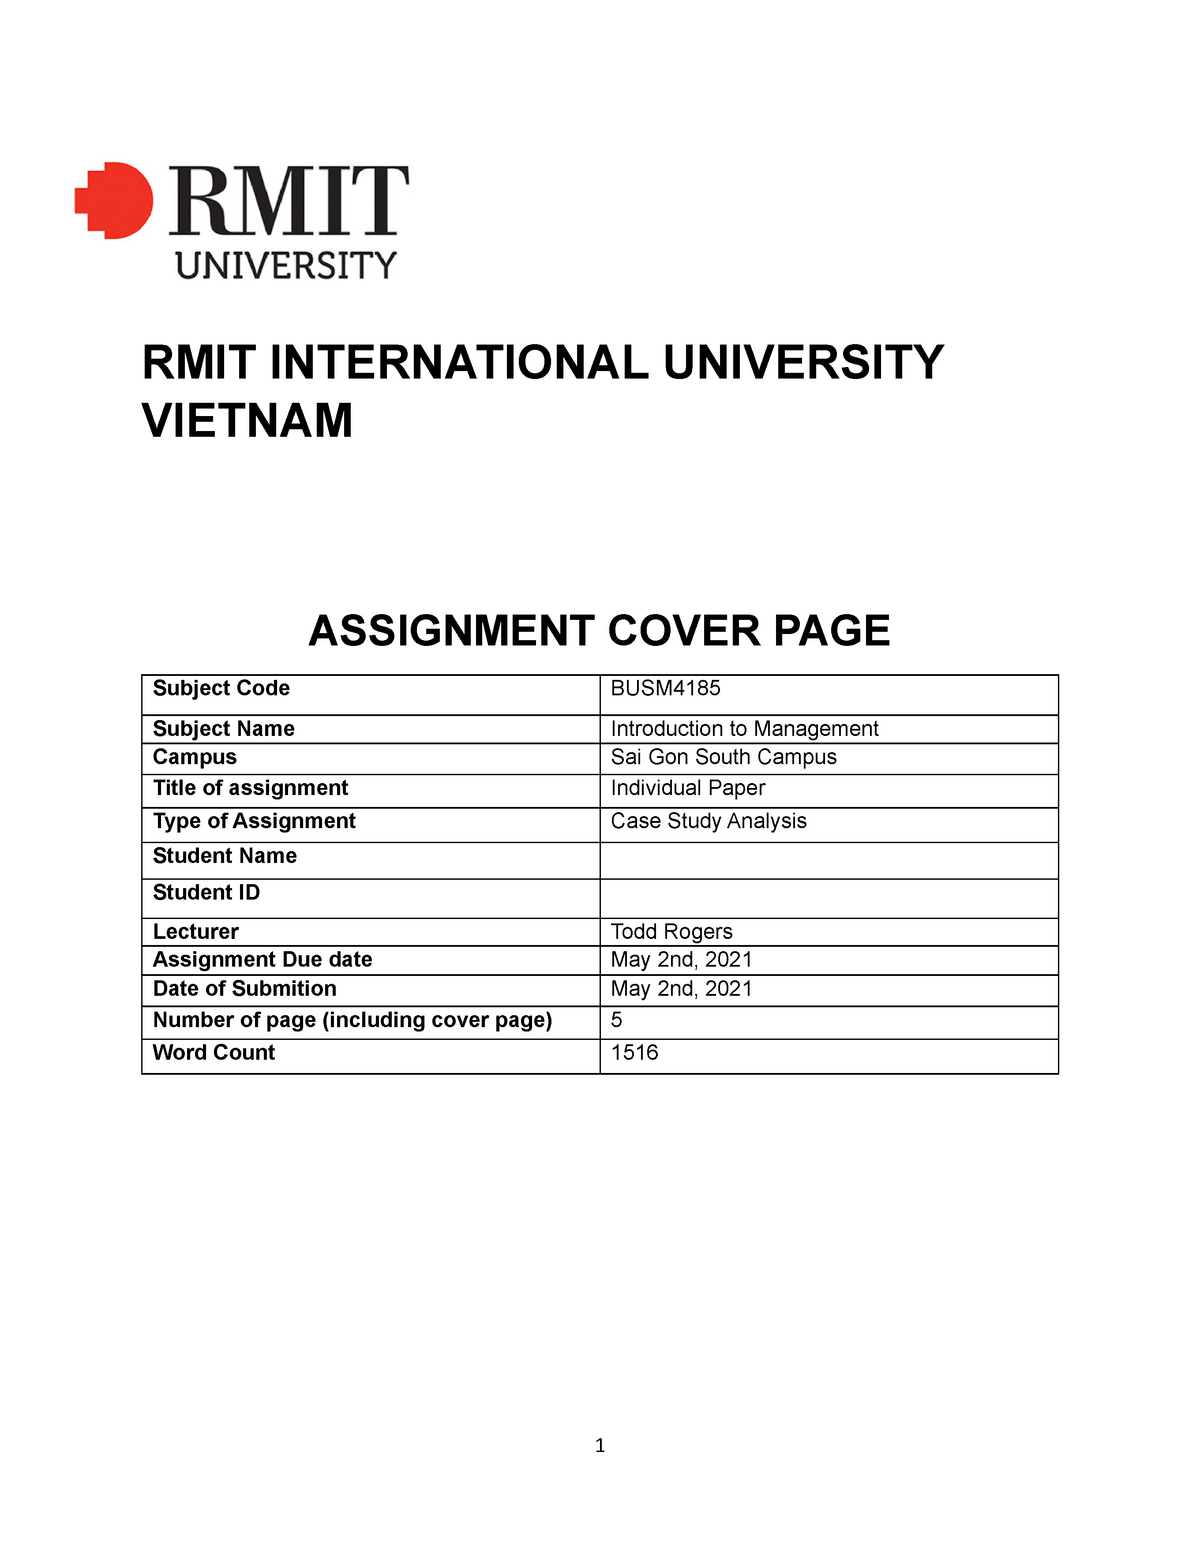 rmit assignment cover sheet